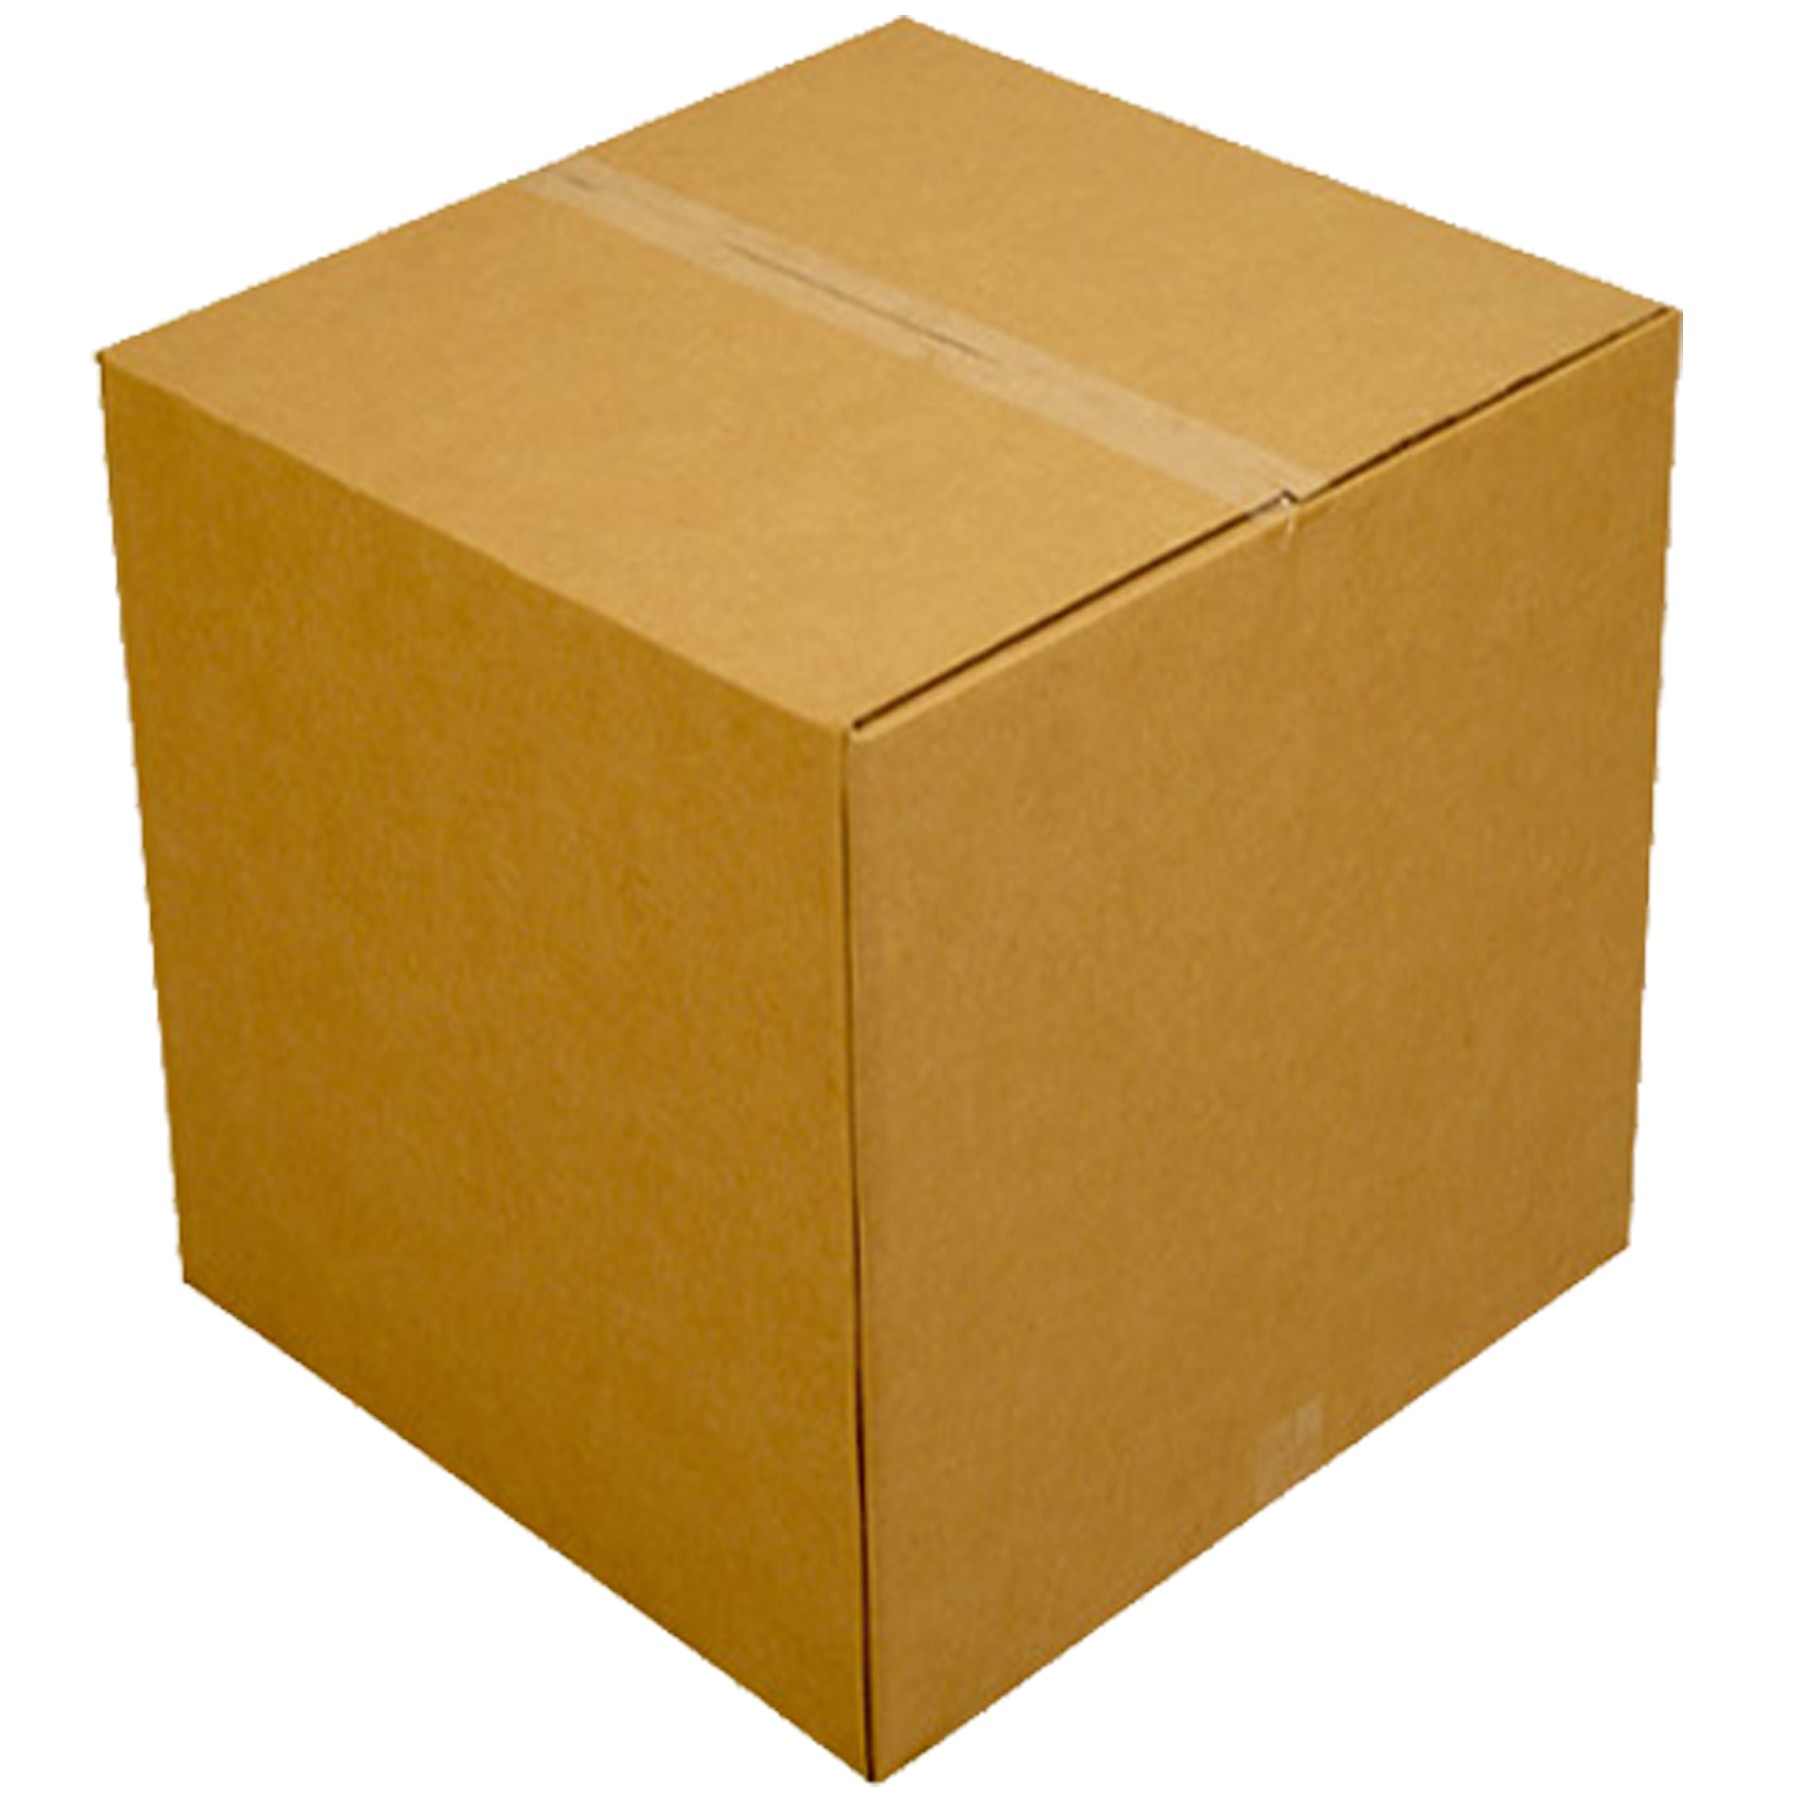 12 Large Moving Boxes 20x20x15-inches Packing Cardboard Boxes ...